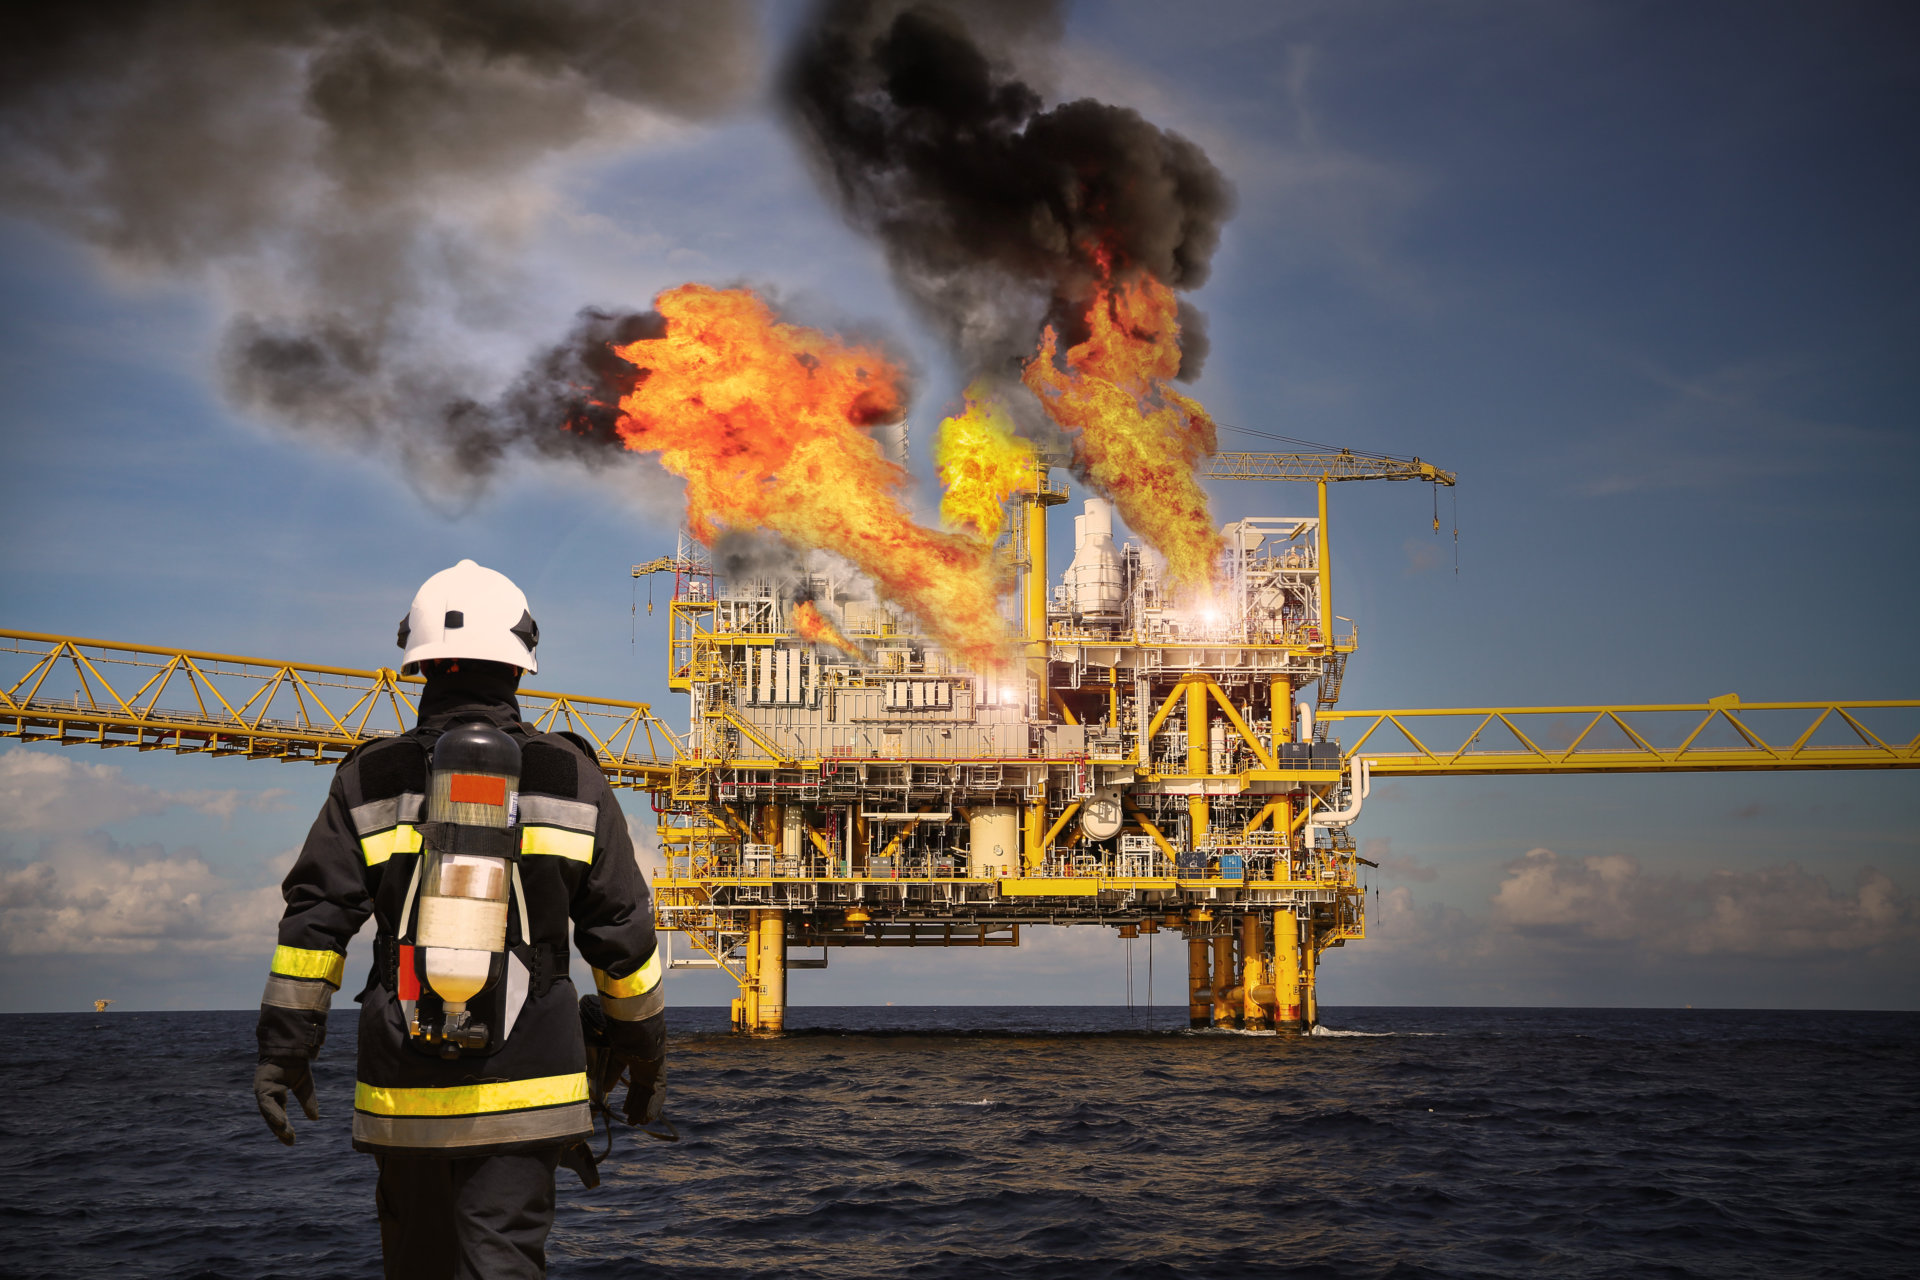 Most Offshore Oil Rig Fires and Gas Explosions Are Preventable